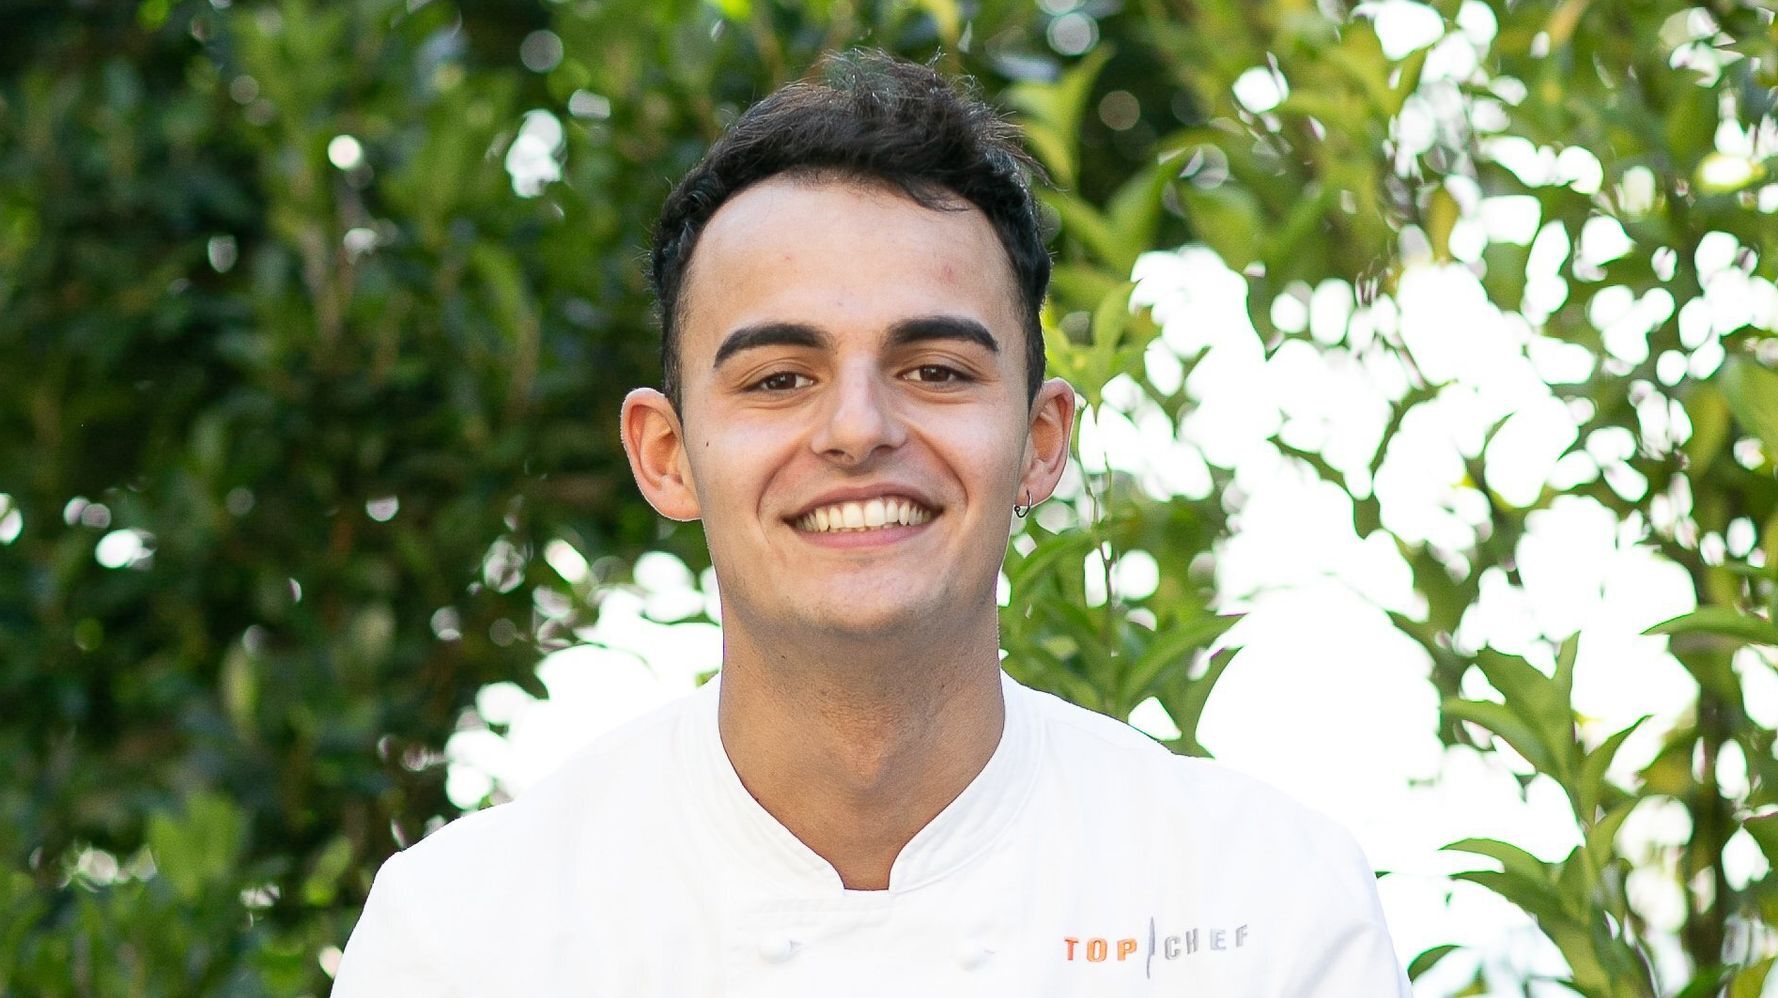 top chef 2020 diego alary reagit a son elimination le huffpost